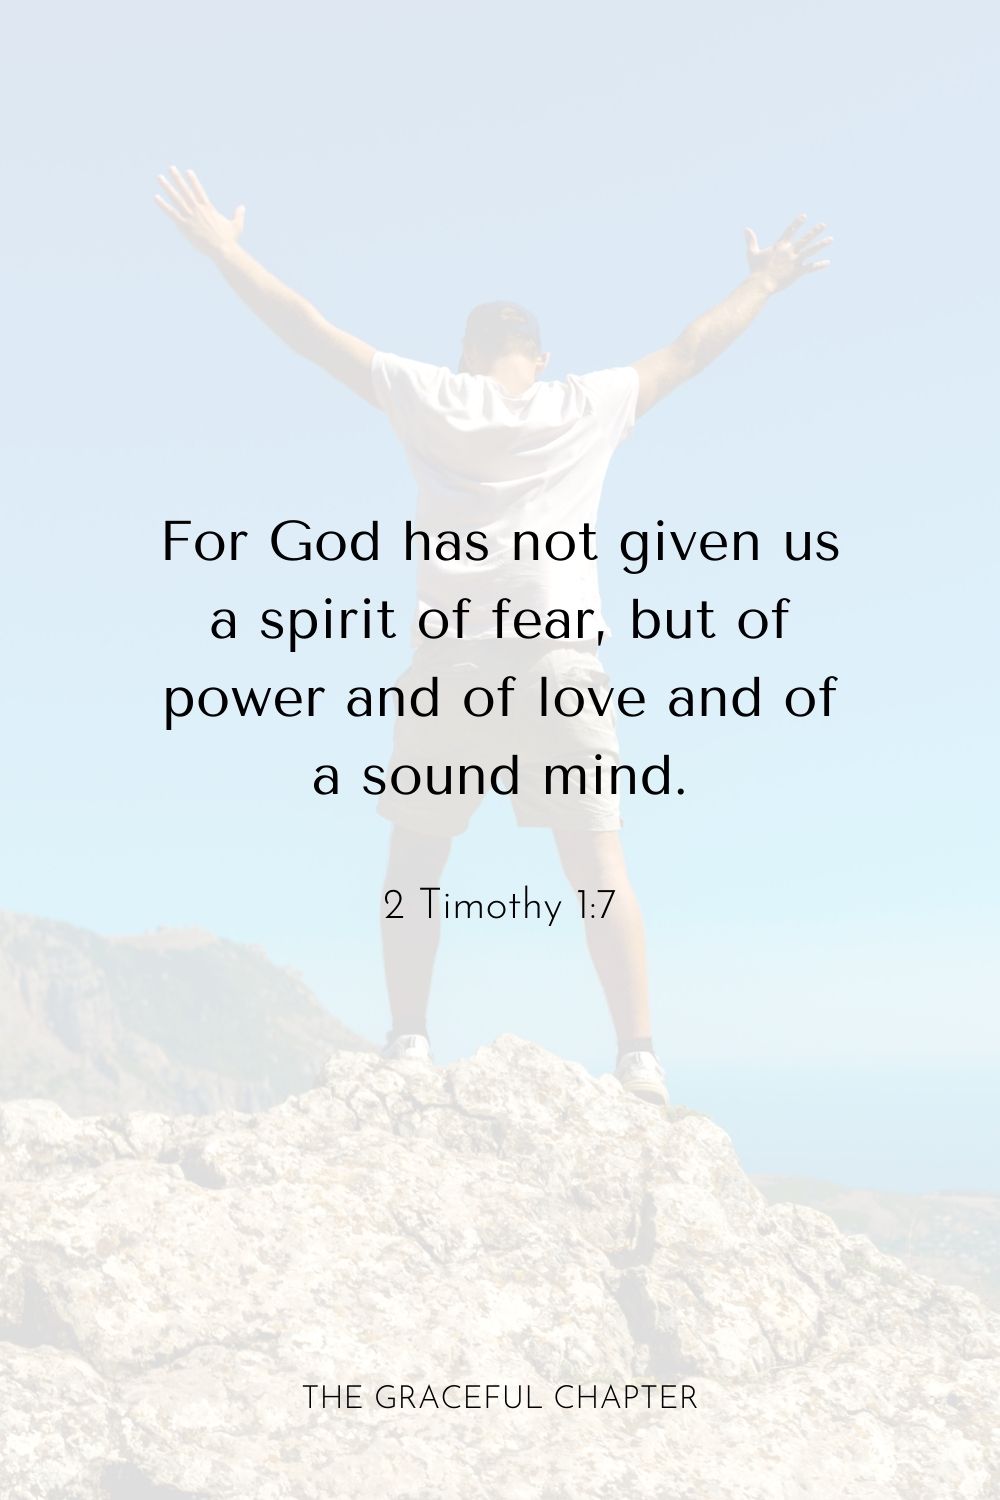 For God has not given us a spirit of fear, but of power and of love and of a sound mind.  2 Timothy 1:7